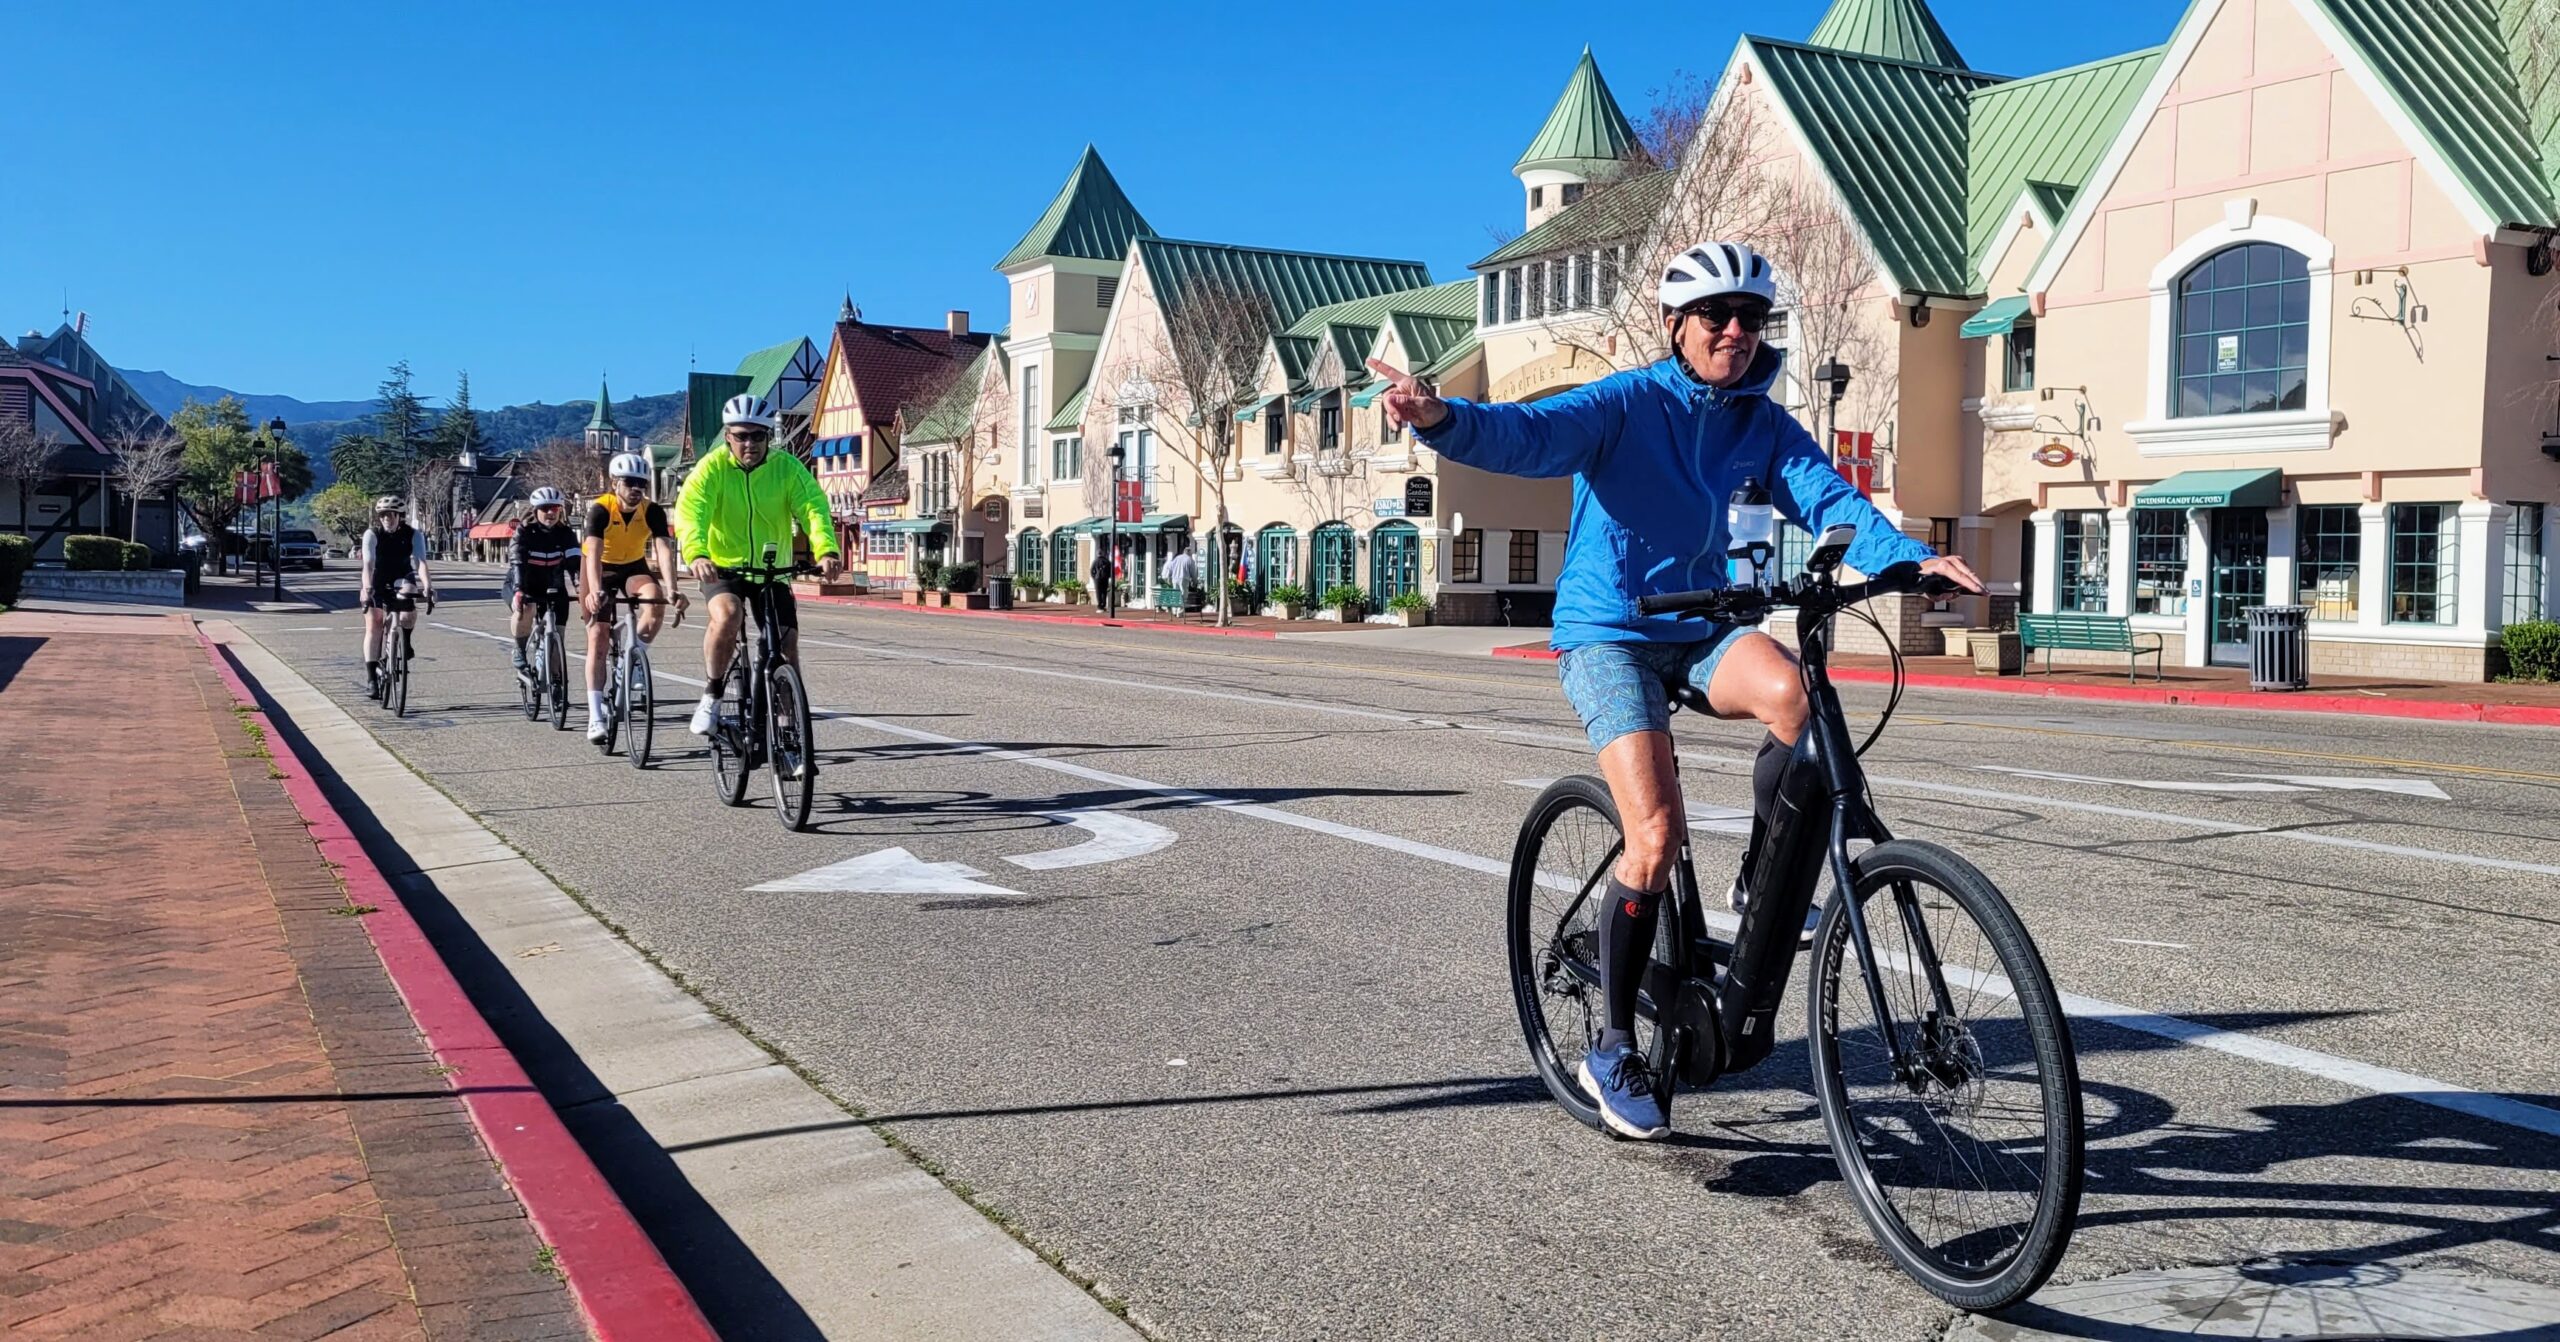 Cyclists riding in downtown Solvang